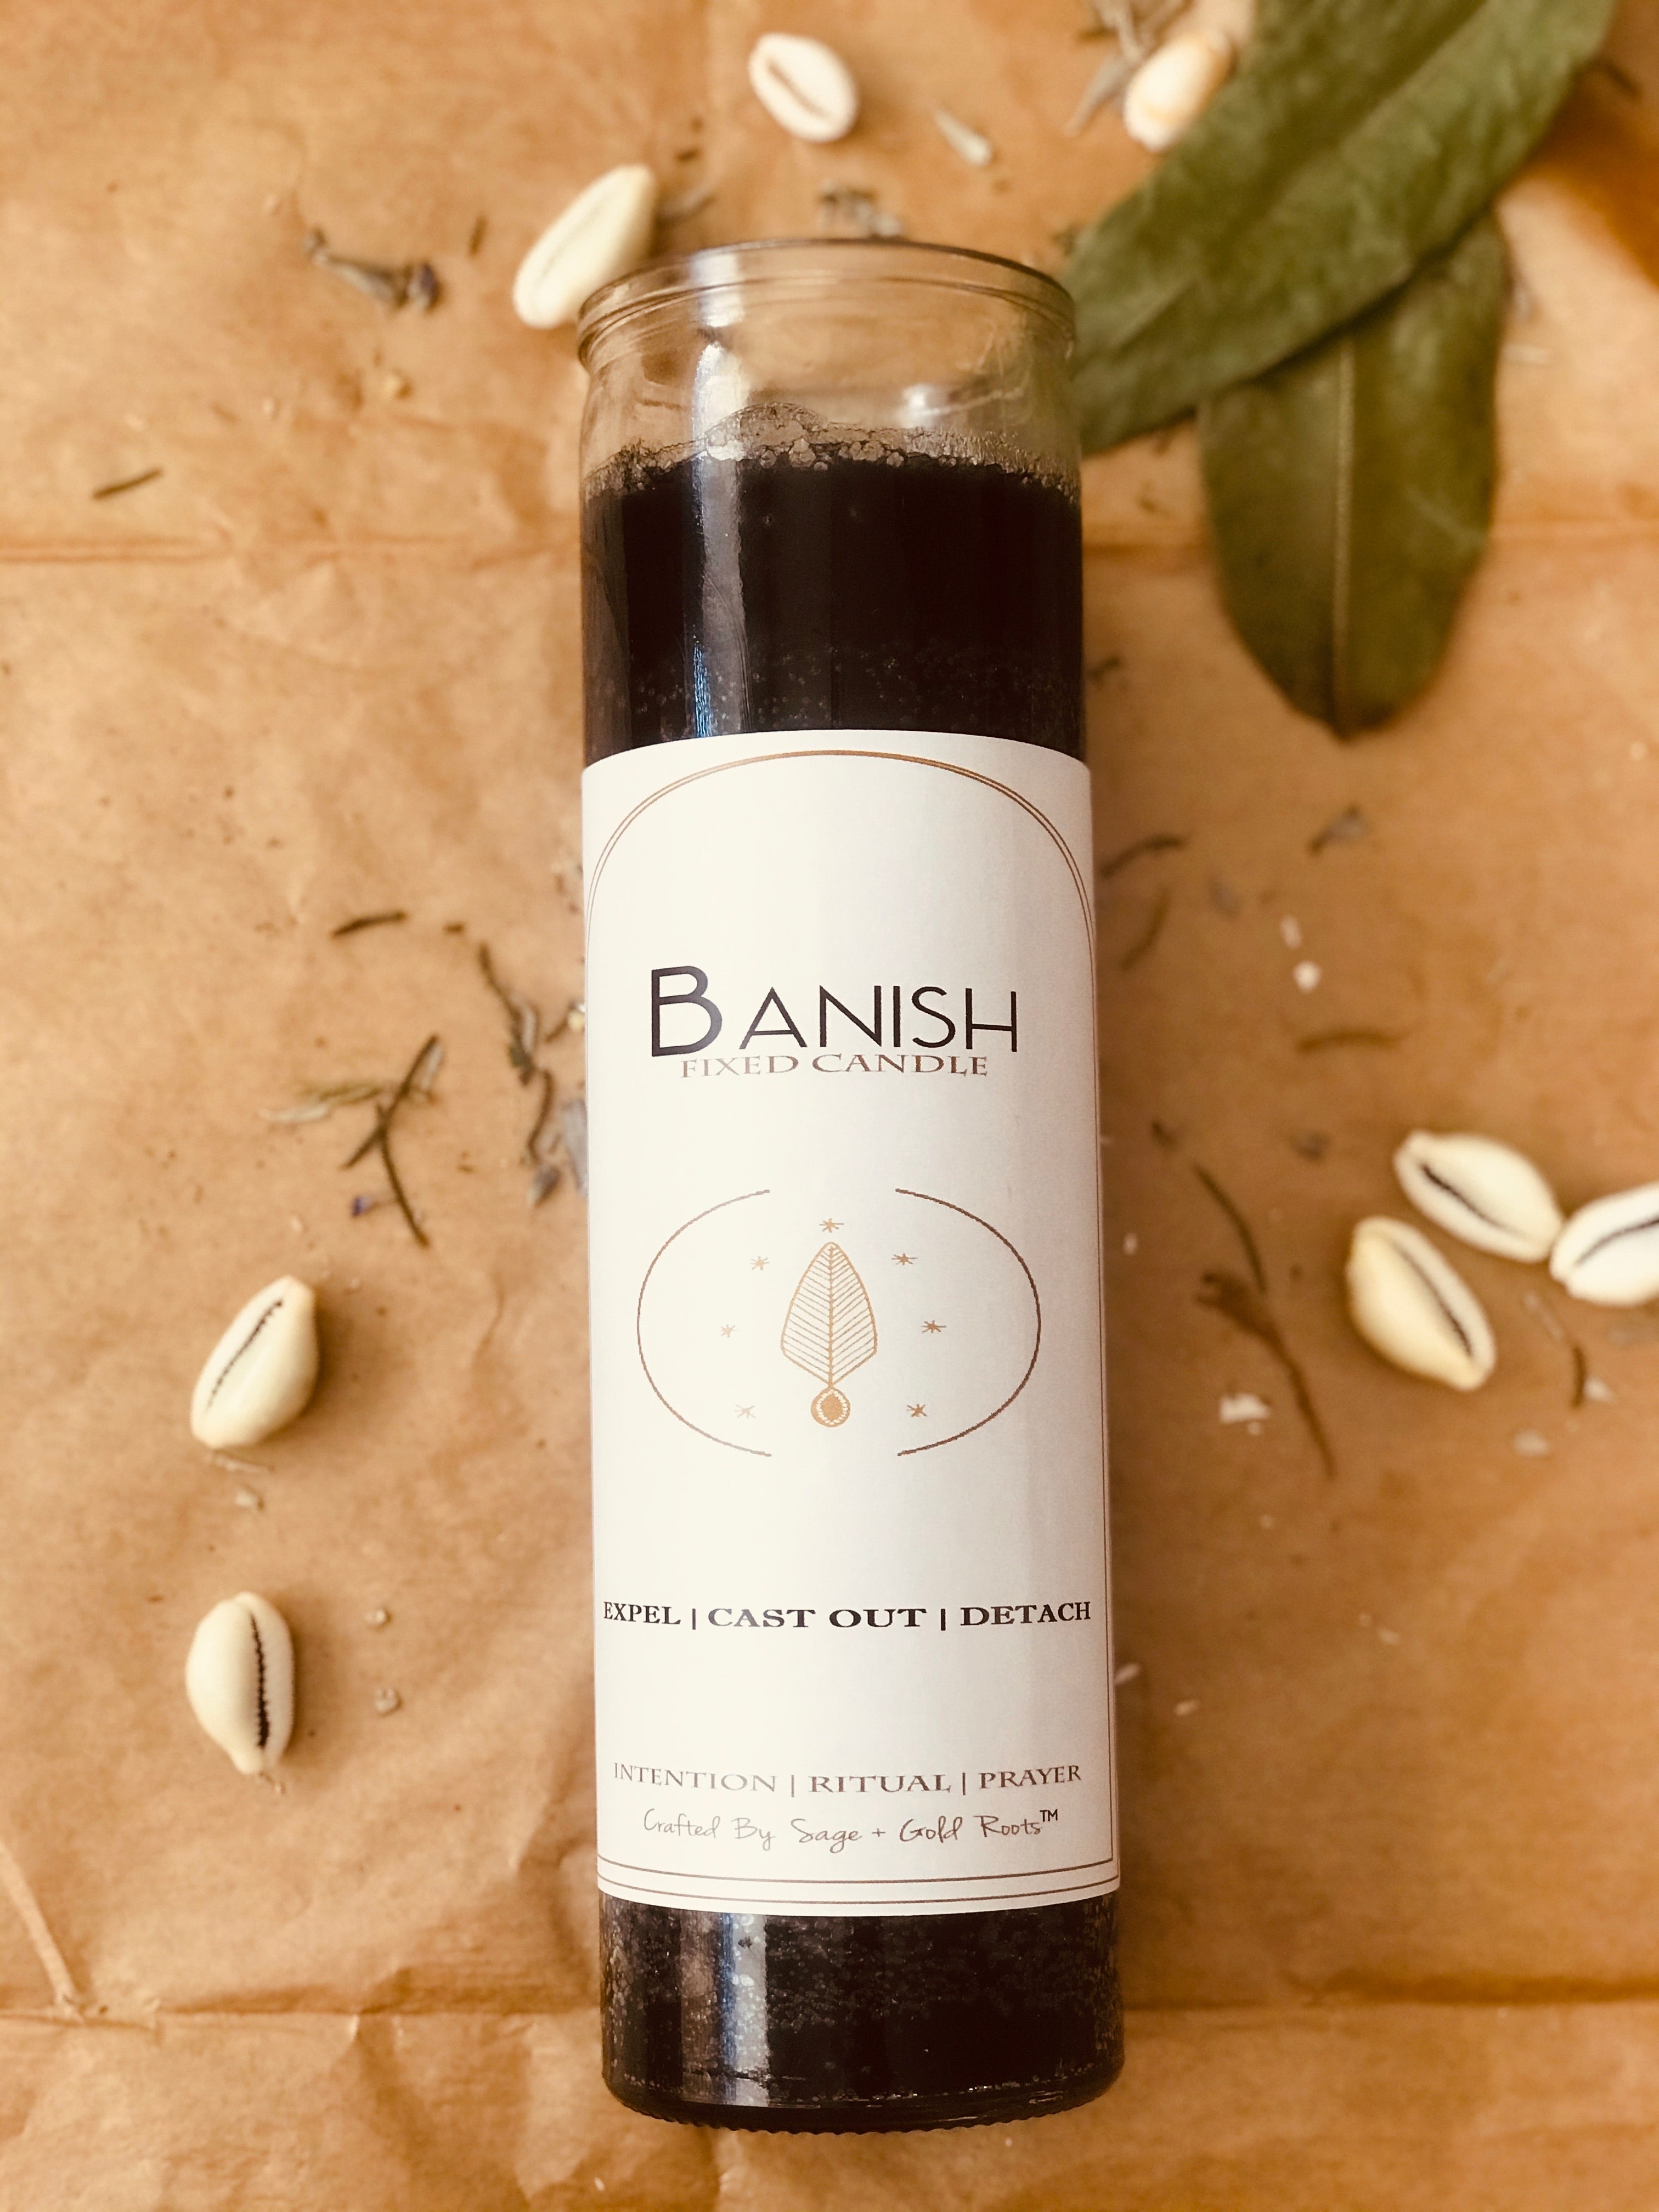 BANISH | Ritual Candle  Sage + Gold Roots